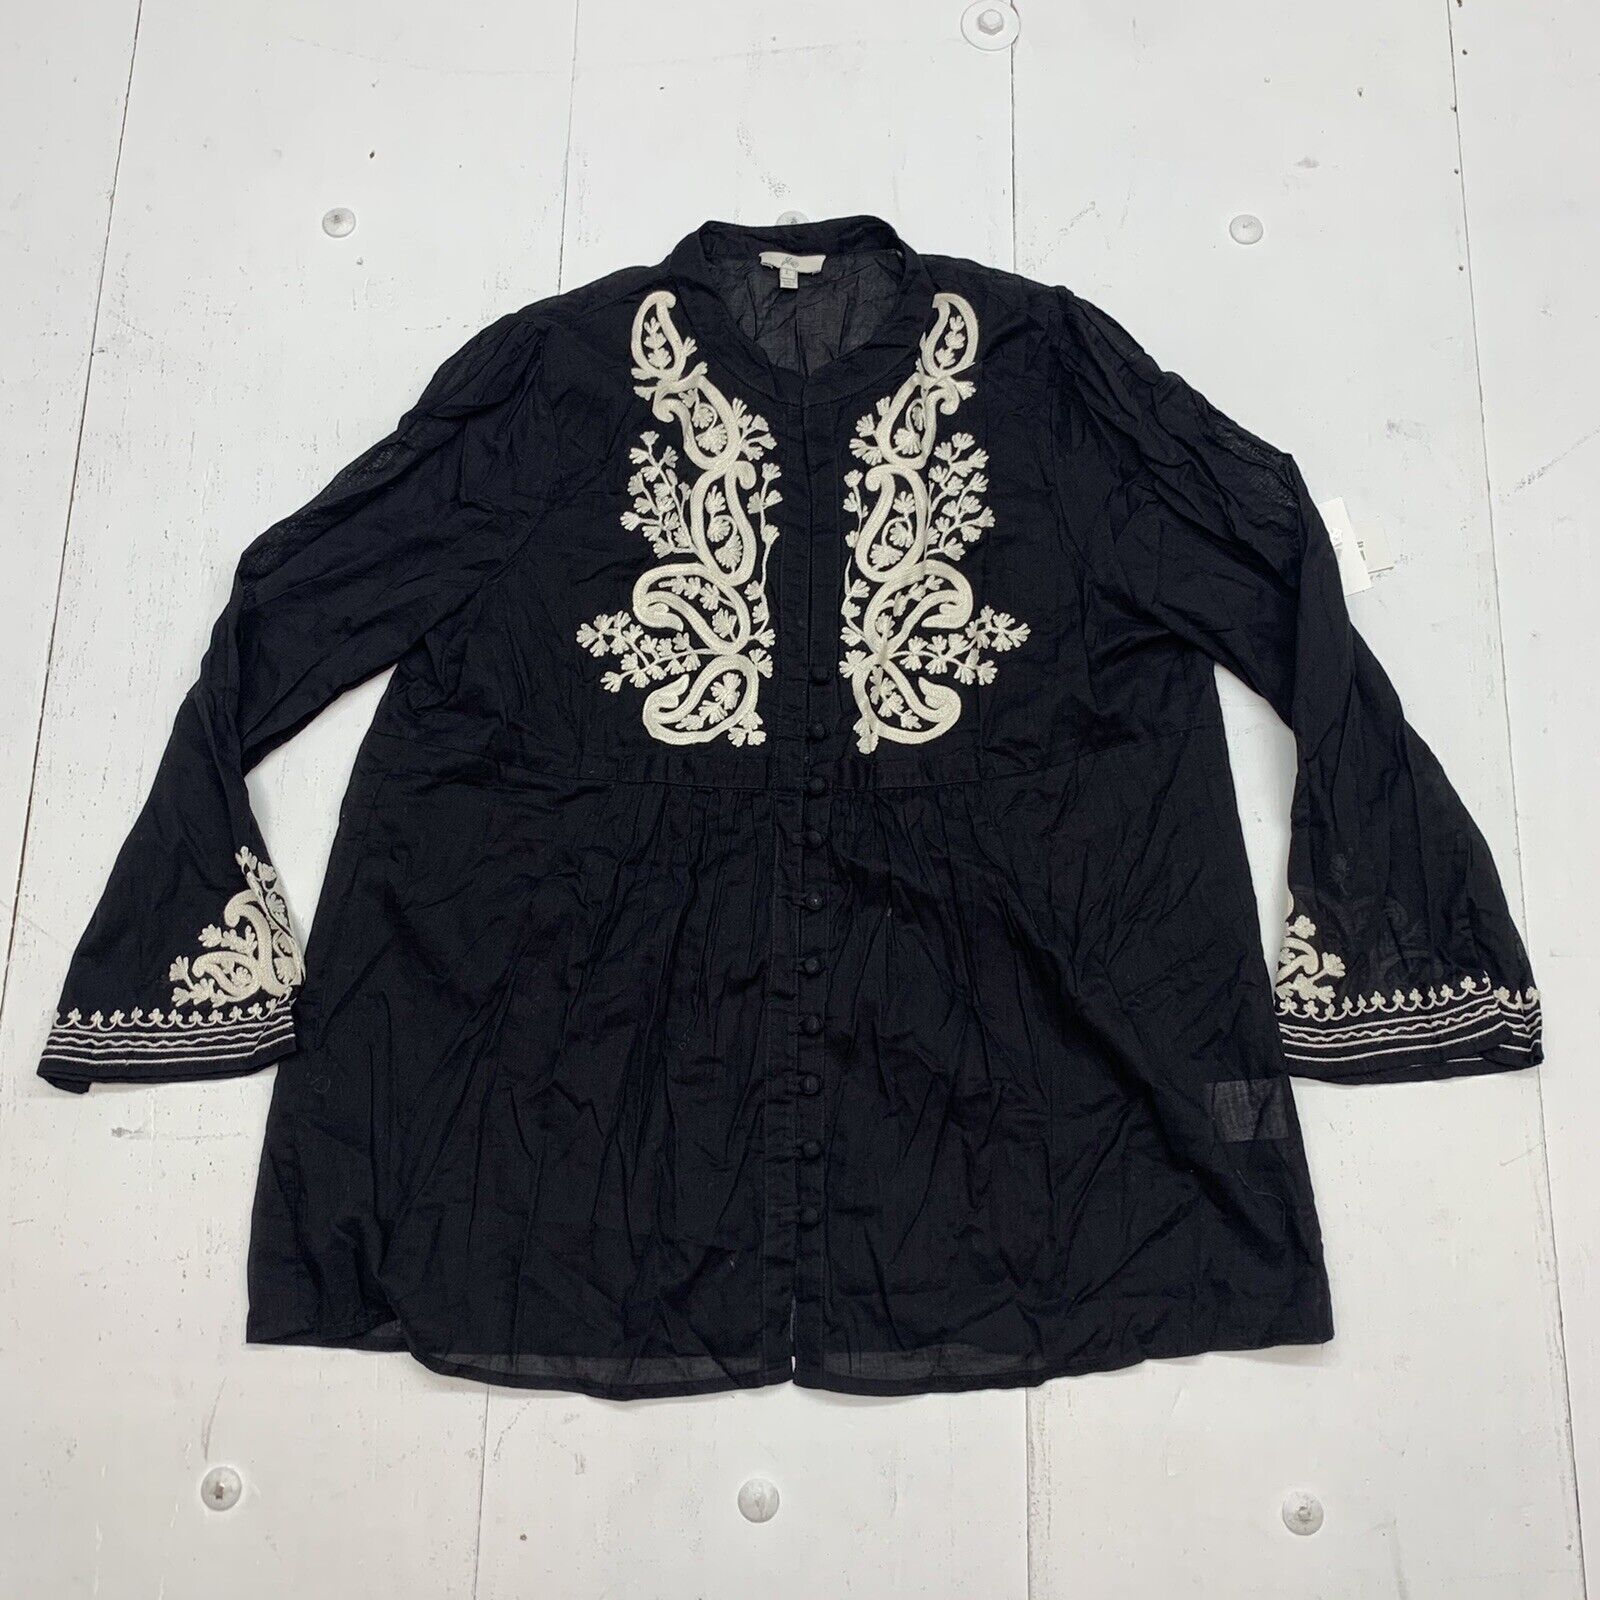 joie Womens Black White Lace Long Sleeve blouse Size Large